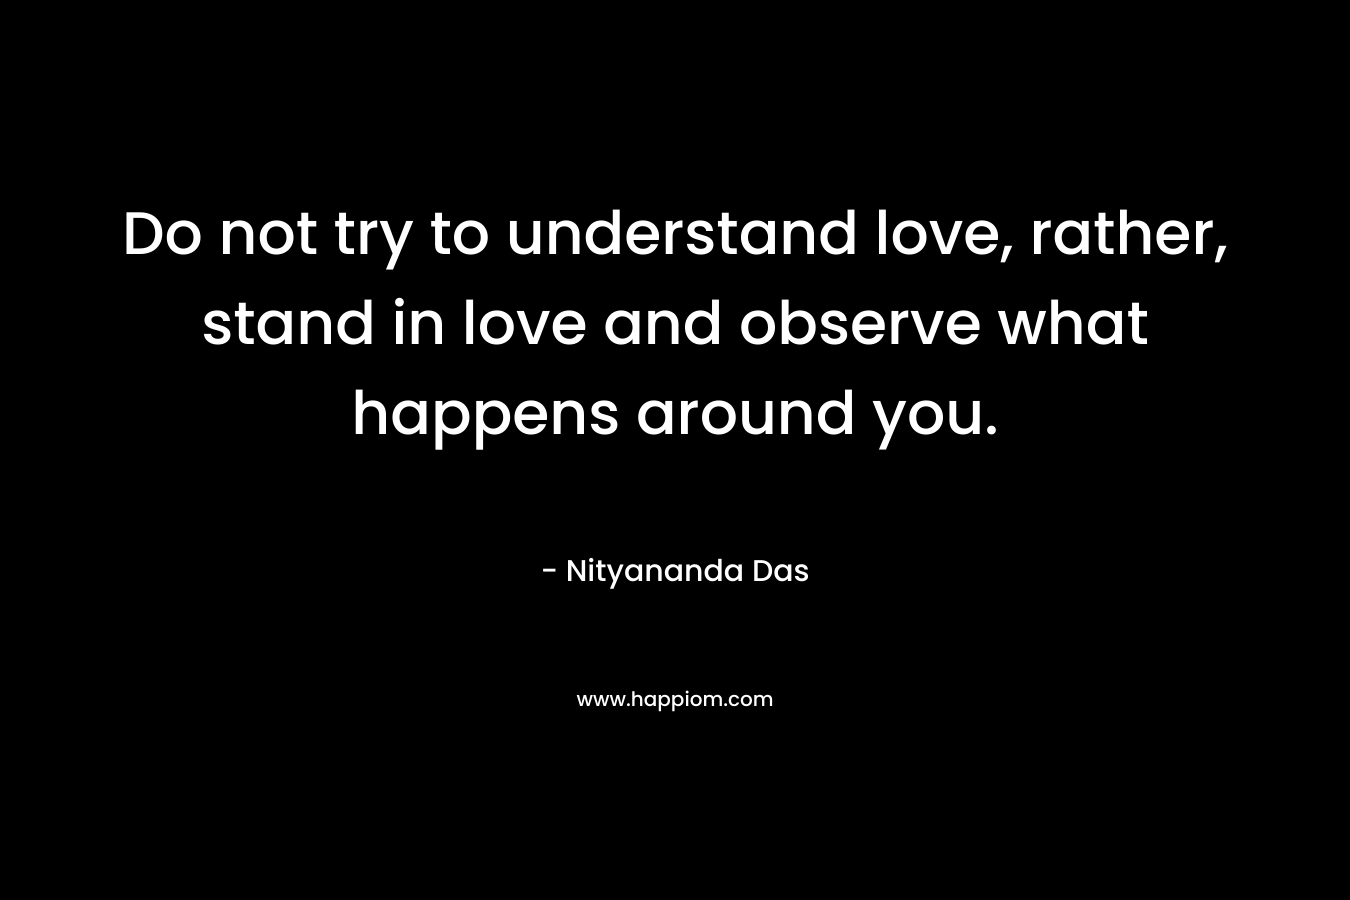 Do not try to understand love, rather, stand in love and observe what happens around you.